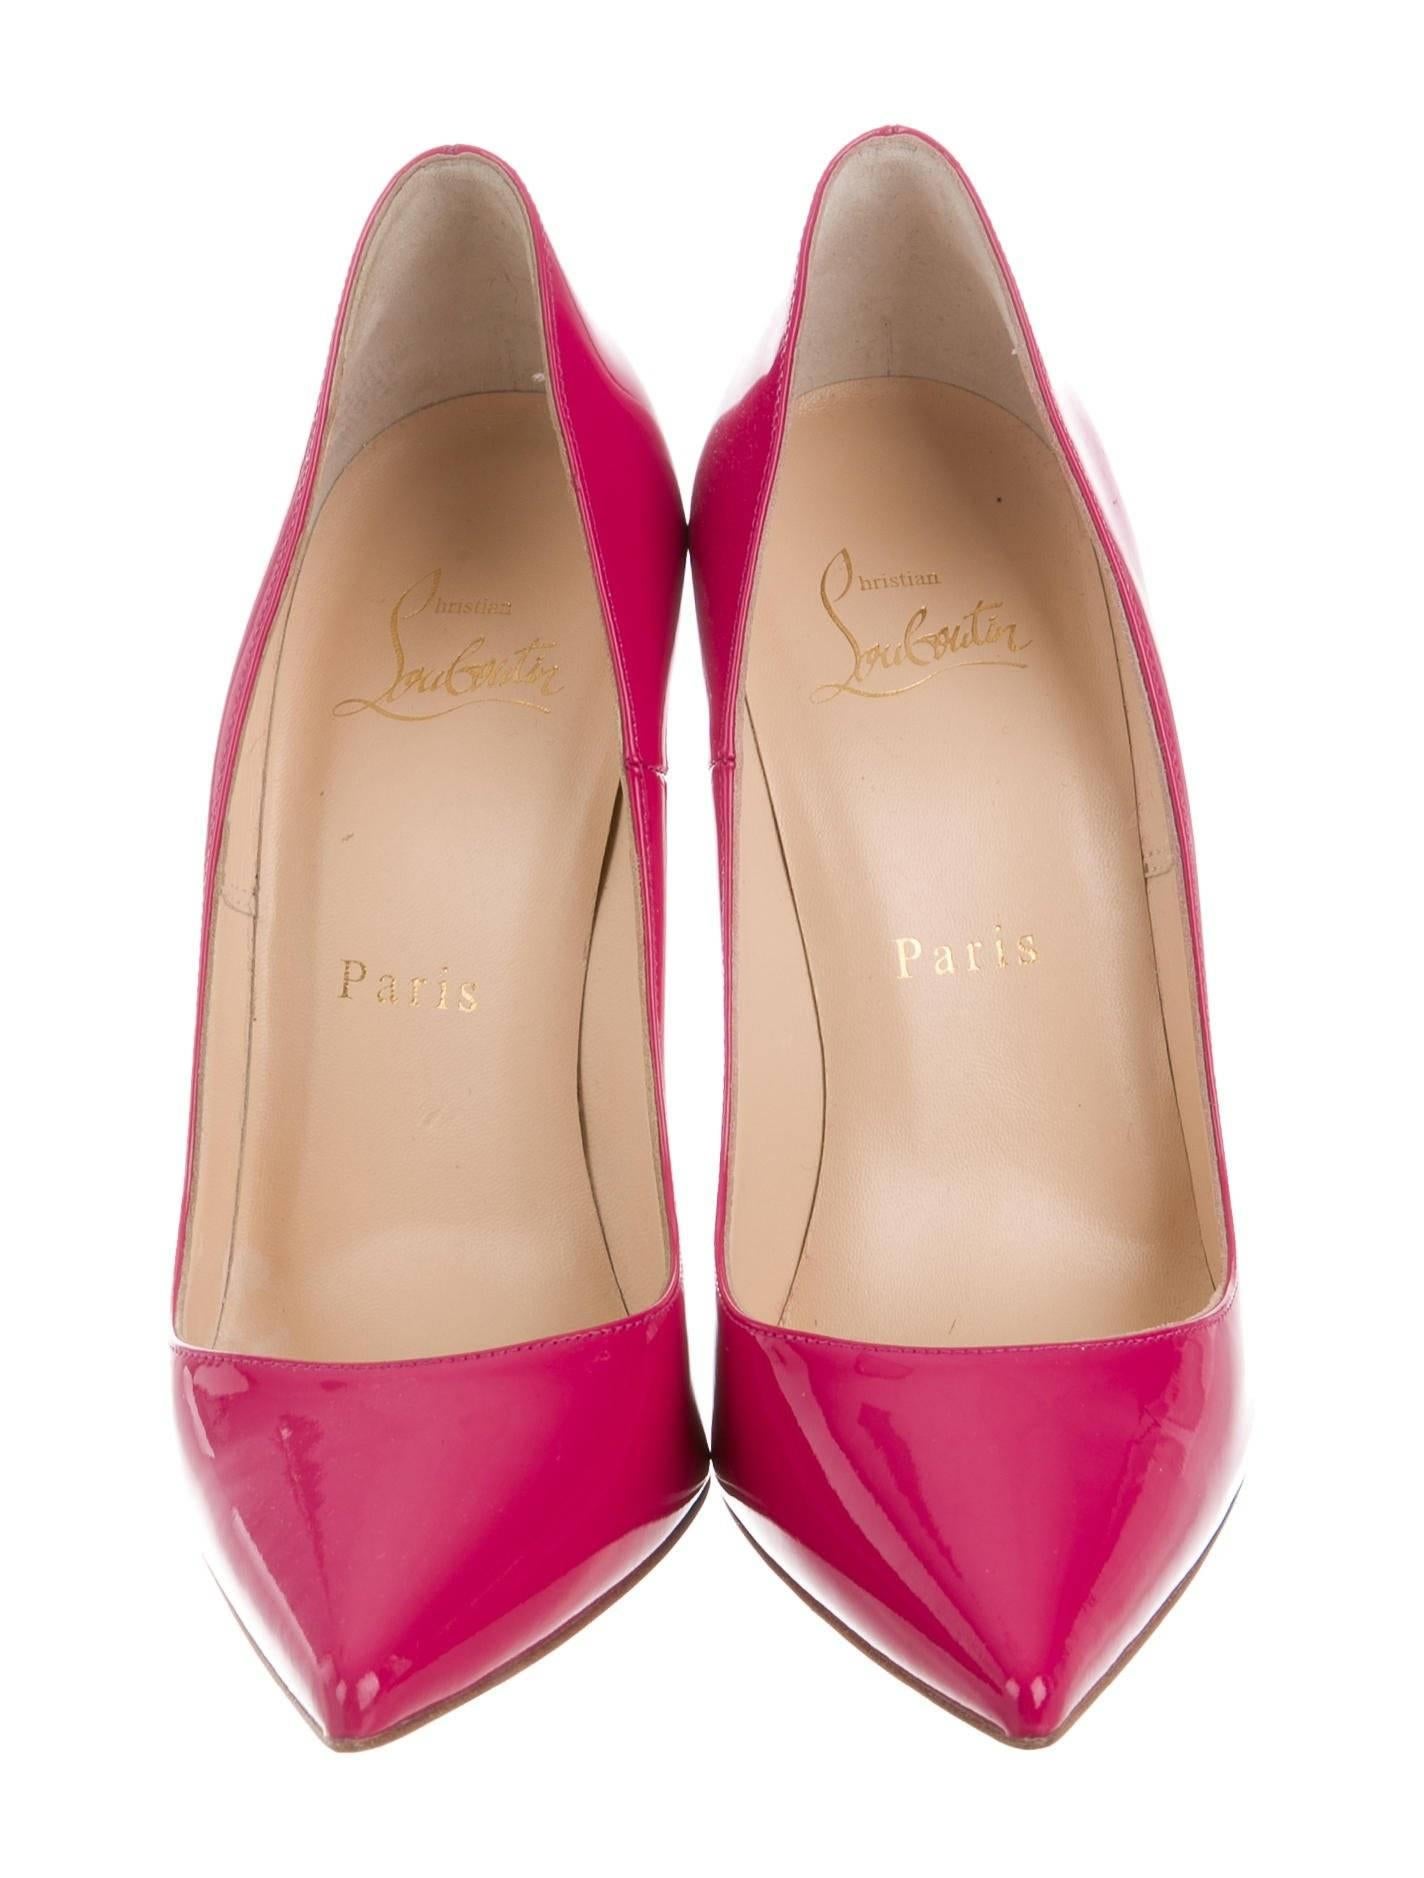 Pink Christian Louboutin NEW Fuchsia Patent Leather Kate High Heels Pumps in Box